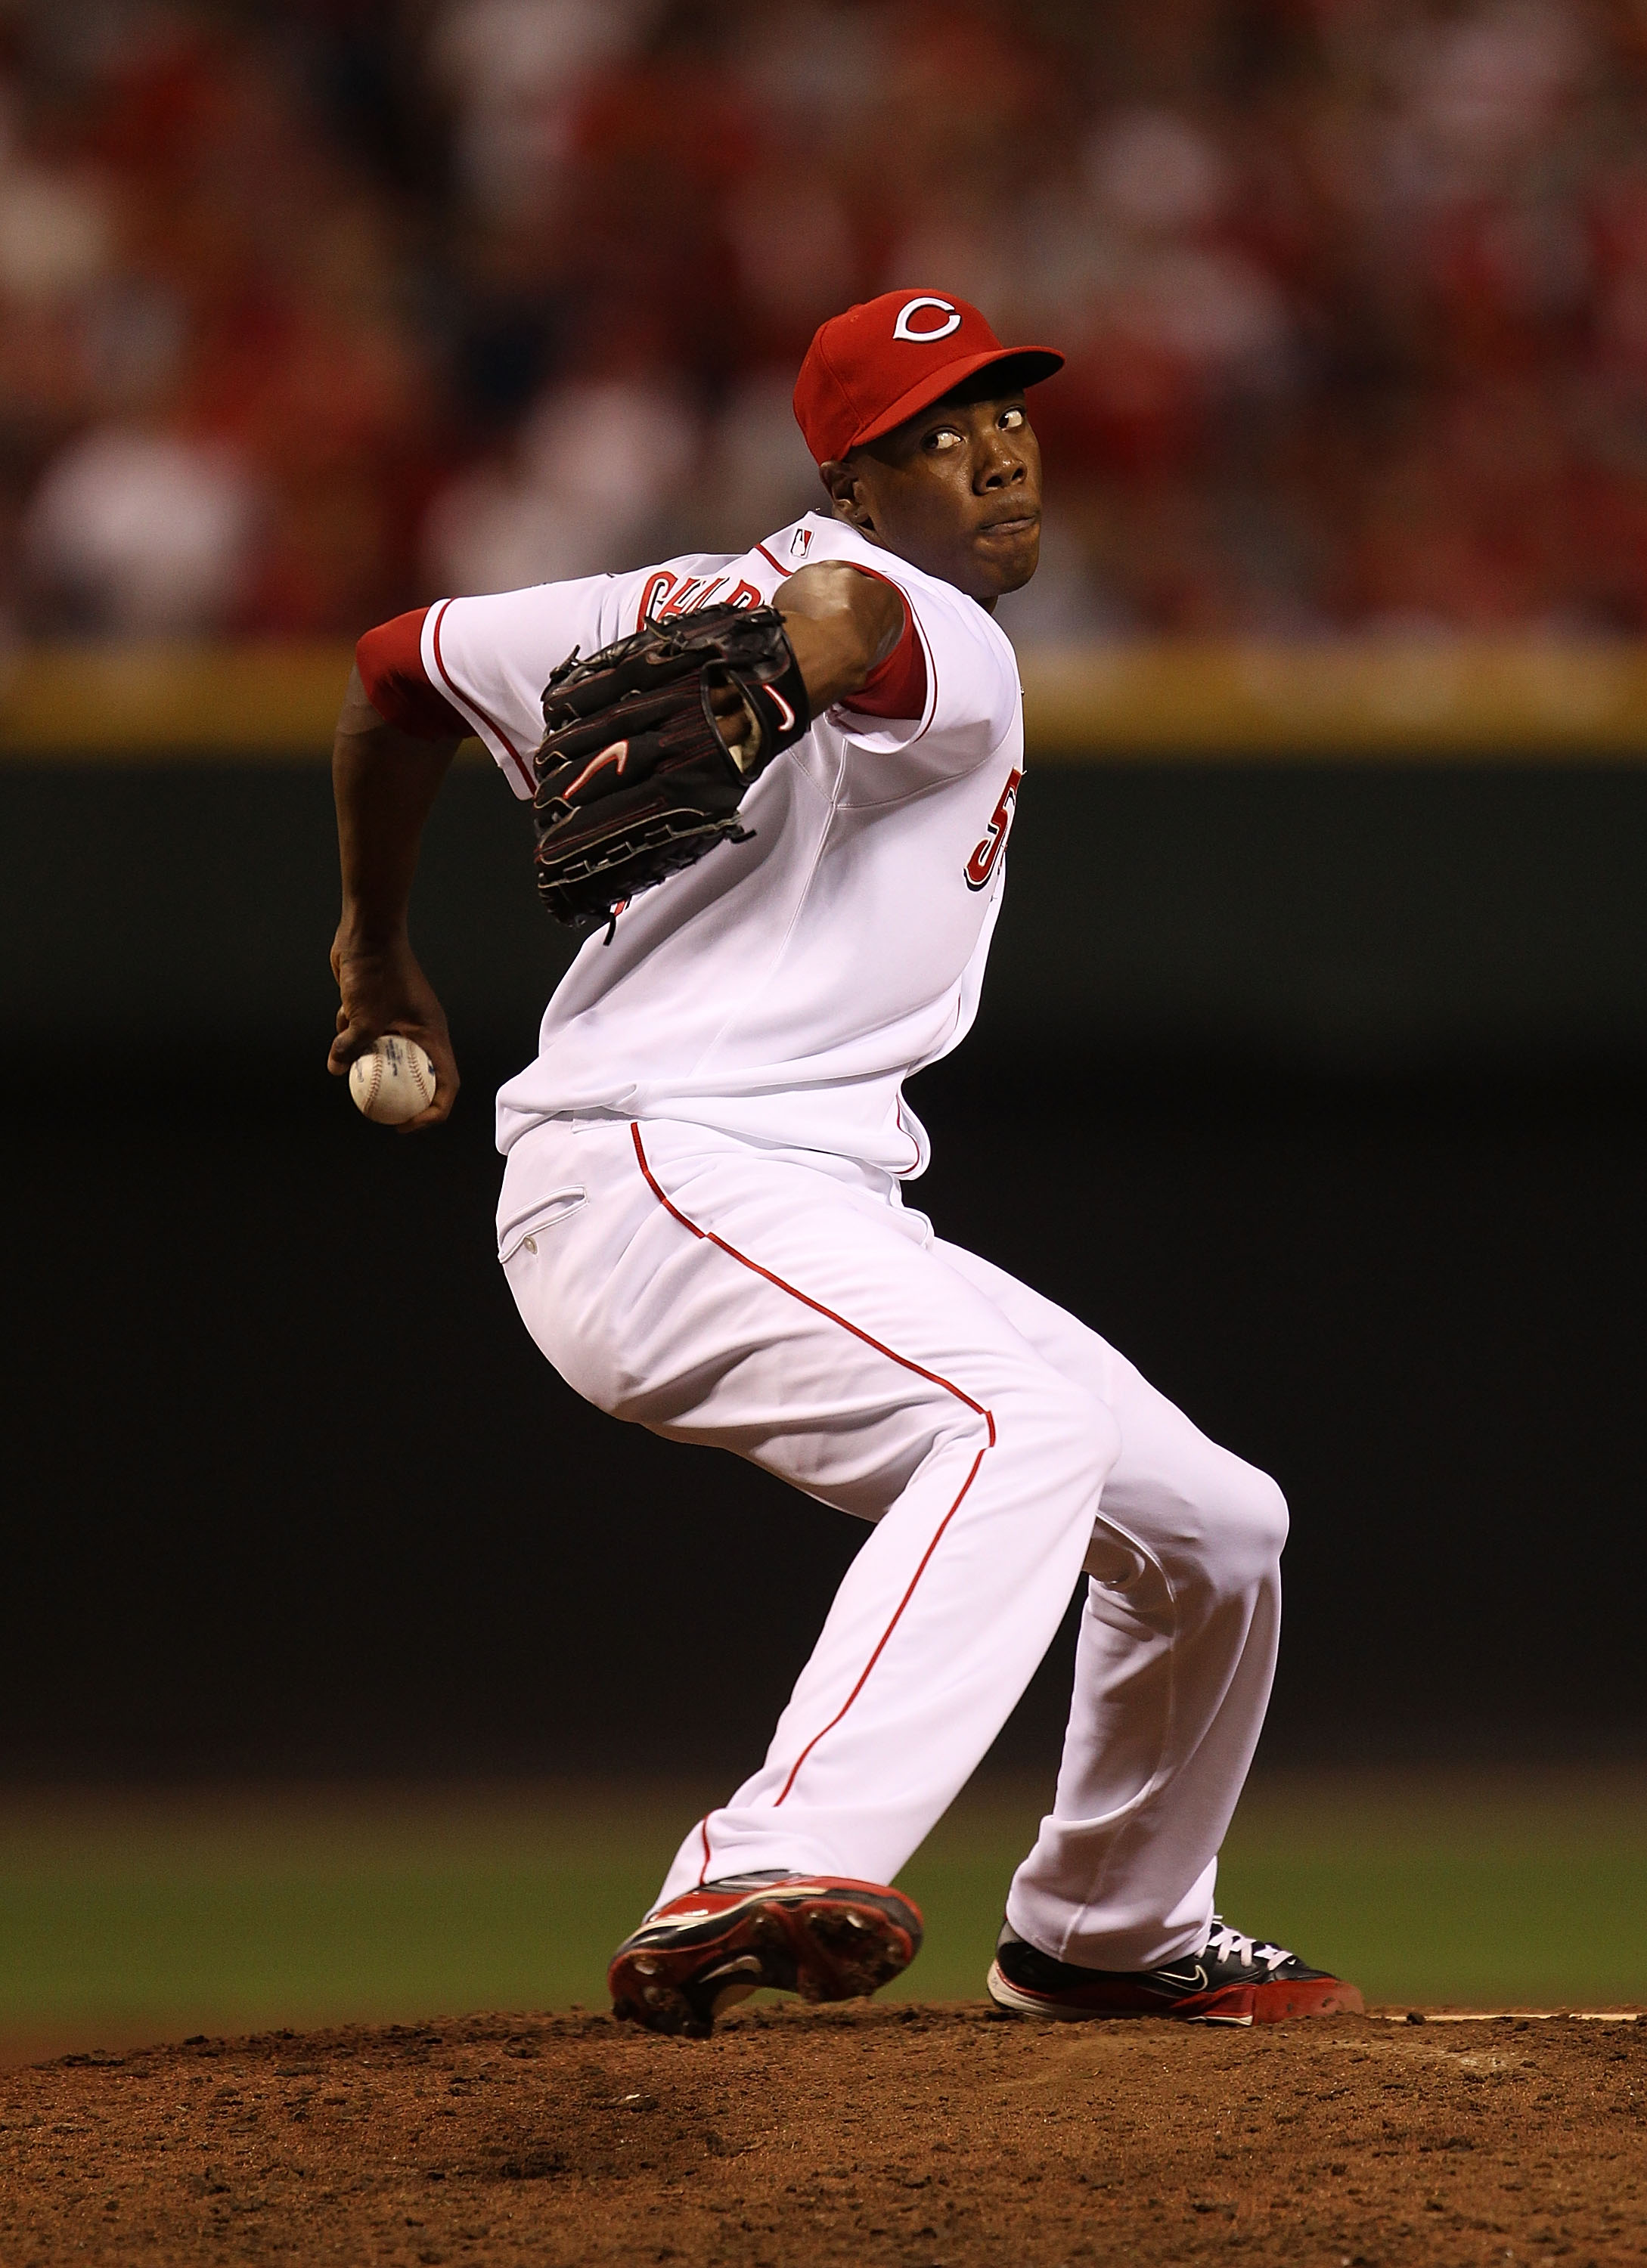 Website creates 'Aroldis Chapman filter' for fastest pitches